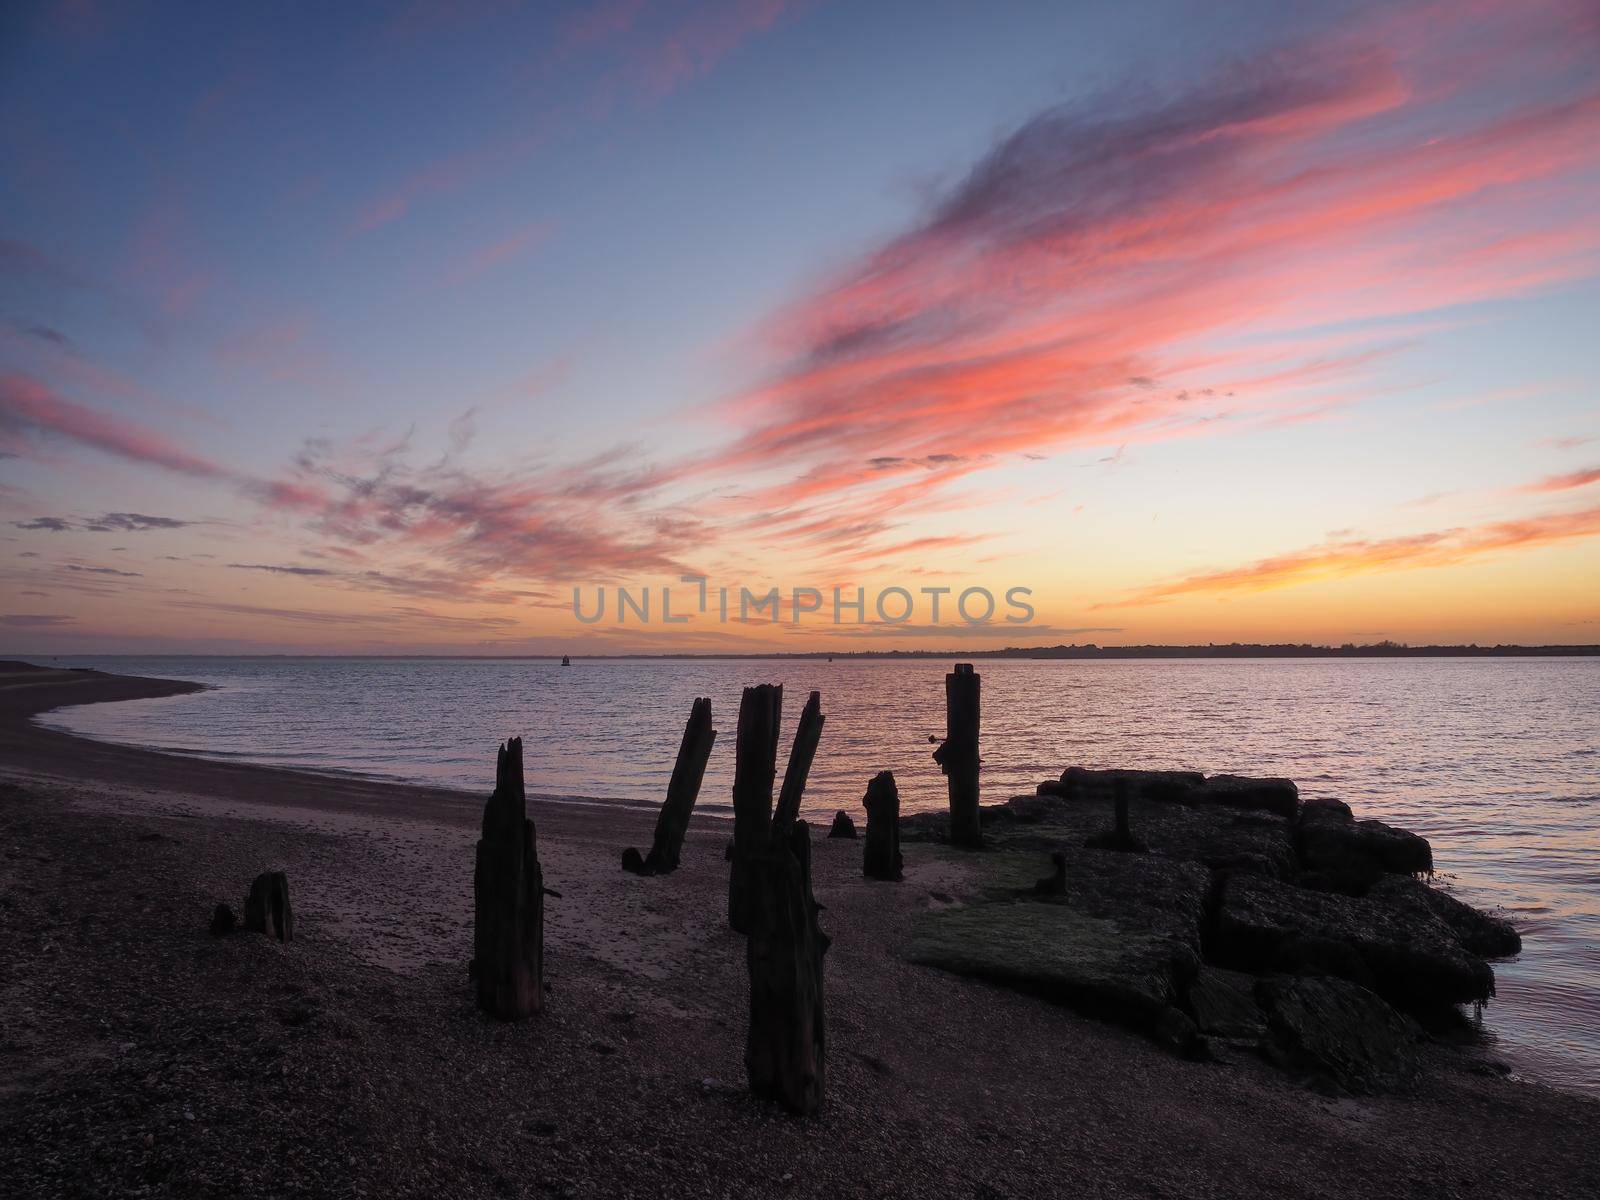 Remains of the old wooden jetty looking out over the sea towards Harwich with a stunning sunset of clouds lit up orange and red, Felixstowe, Suffolk, UK